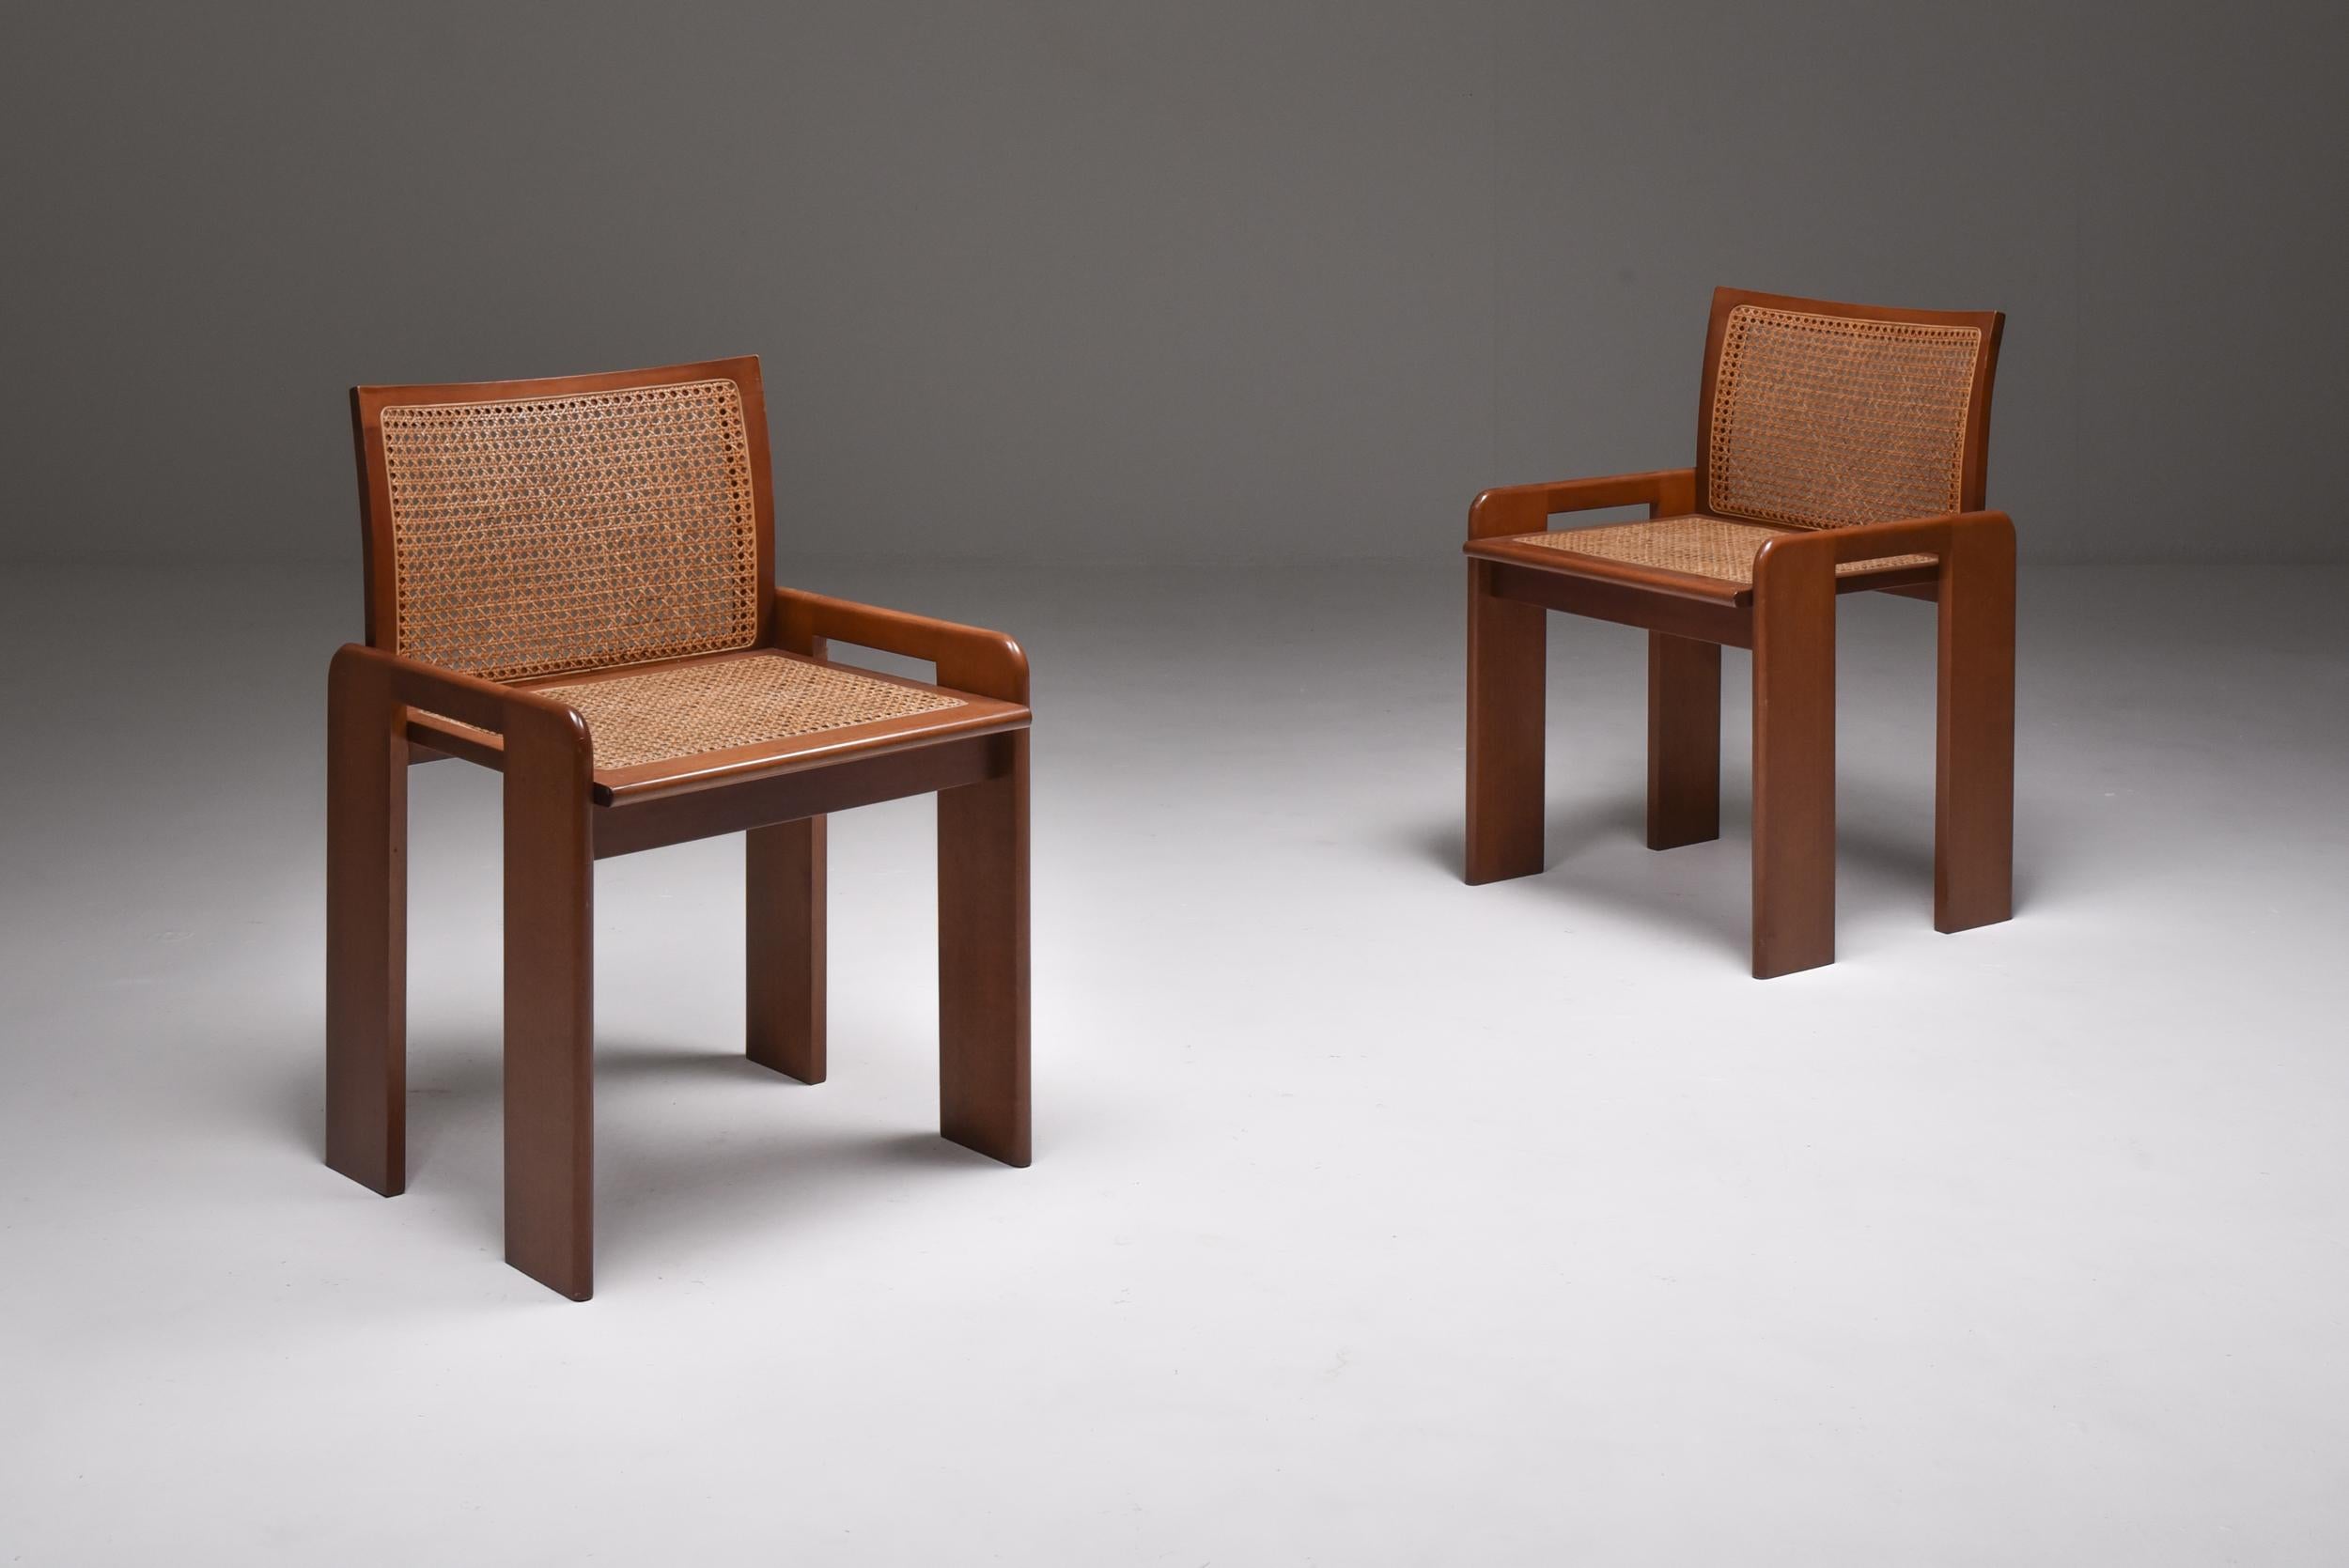 Late 20th Century Scarpa Style Italian Dining Chairs in Walnut and Cane Seating